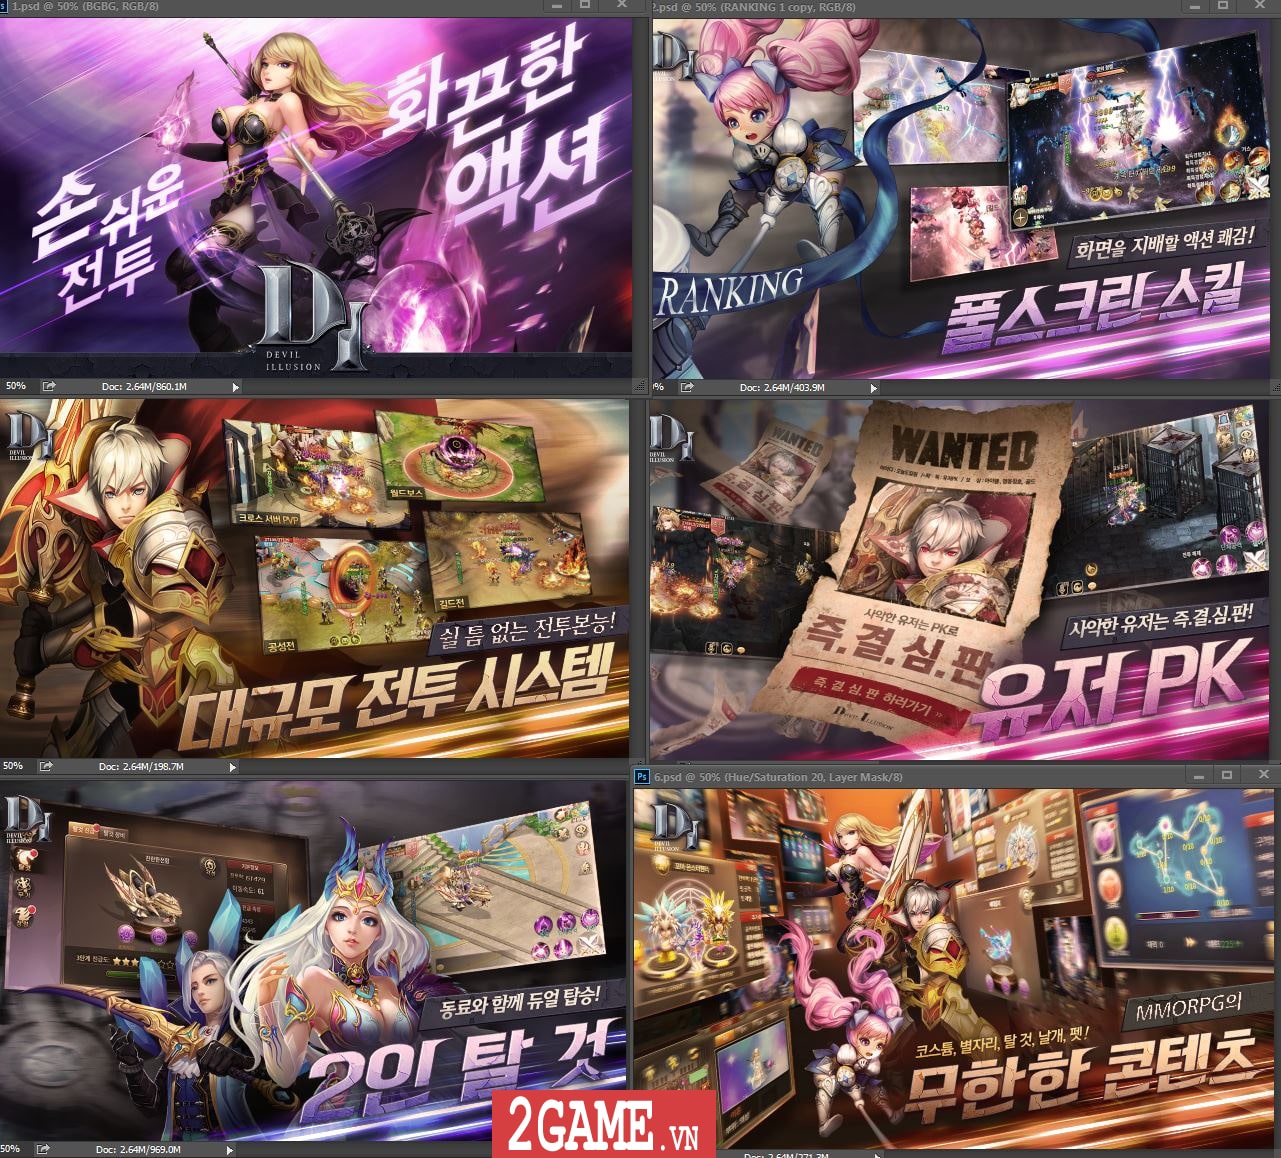 2game-ky-sy-rong-mobile-5.jpg (1281×1158)